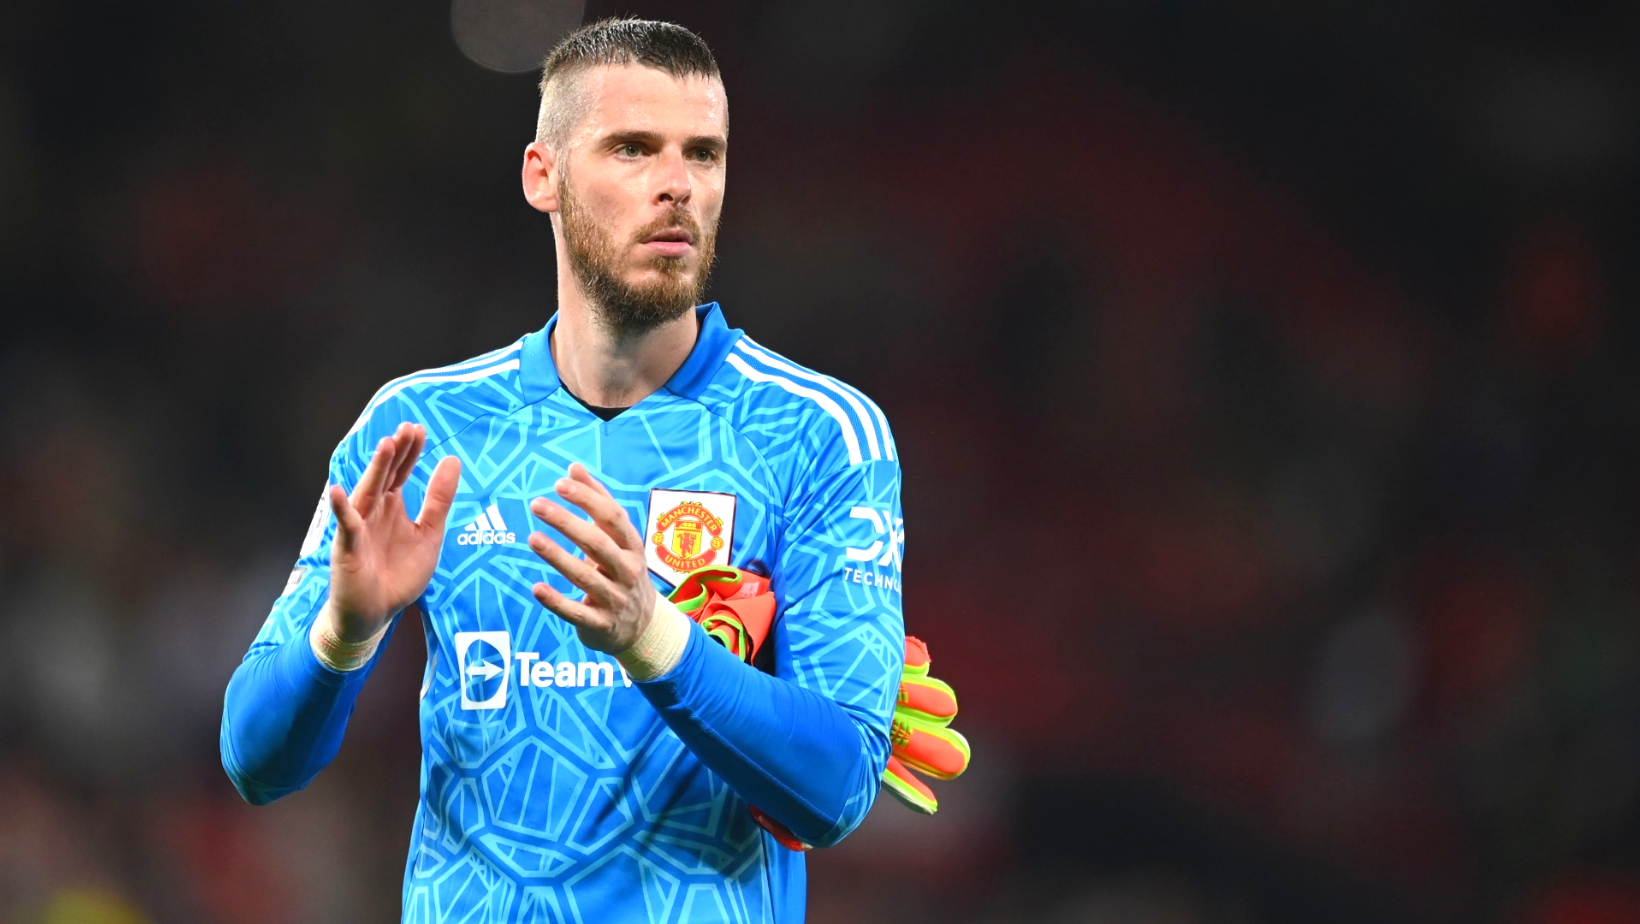 How De Gea1 could play his way into new Man Utd contract